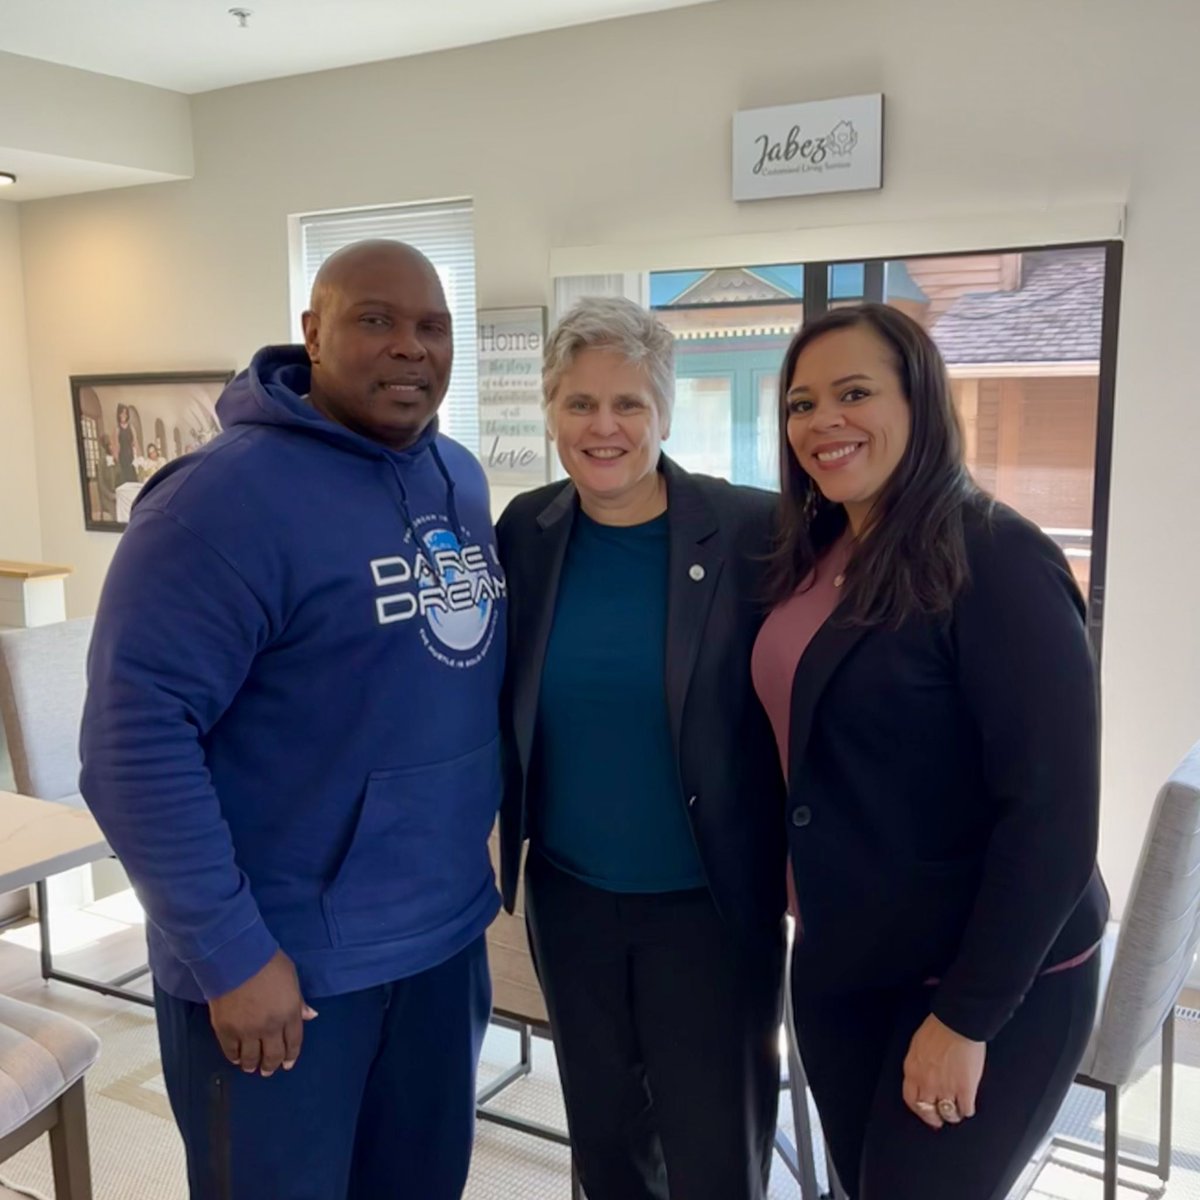 Thank you De’Vord Allen, Director of Pathways to True Freedom, for a tour of the beautiful, safe space for community members returning from prison or struggling with addiction. I enjoyed learning note about peer based recovery community organizations. Thank you for your work!